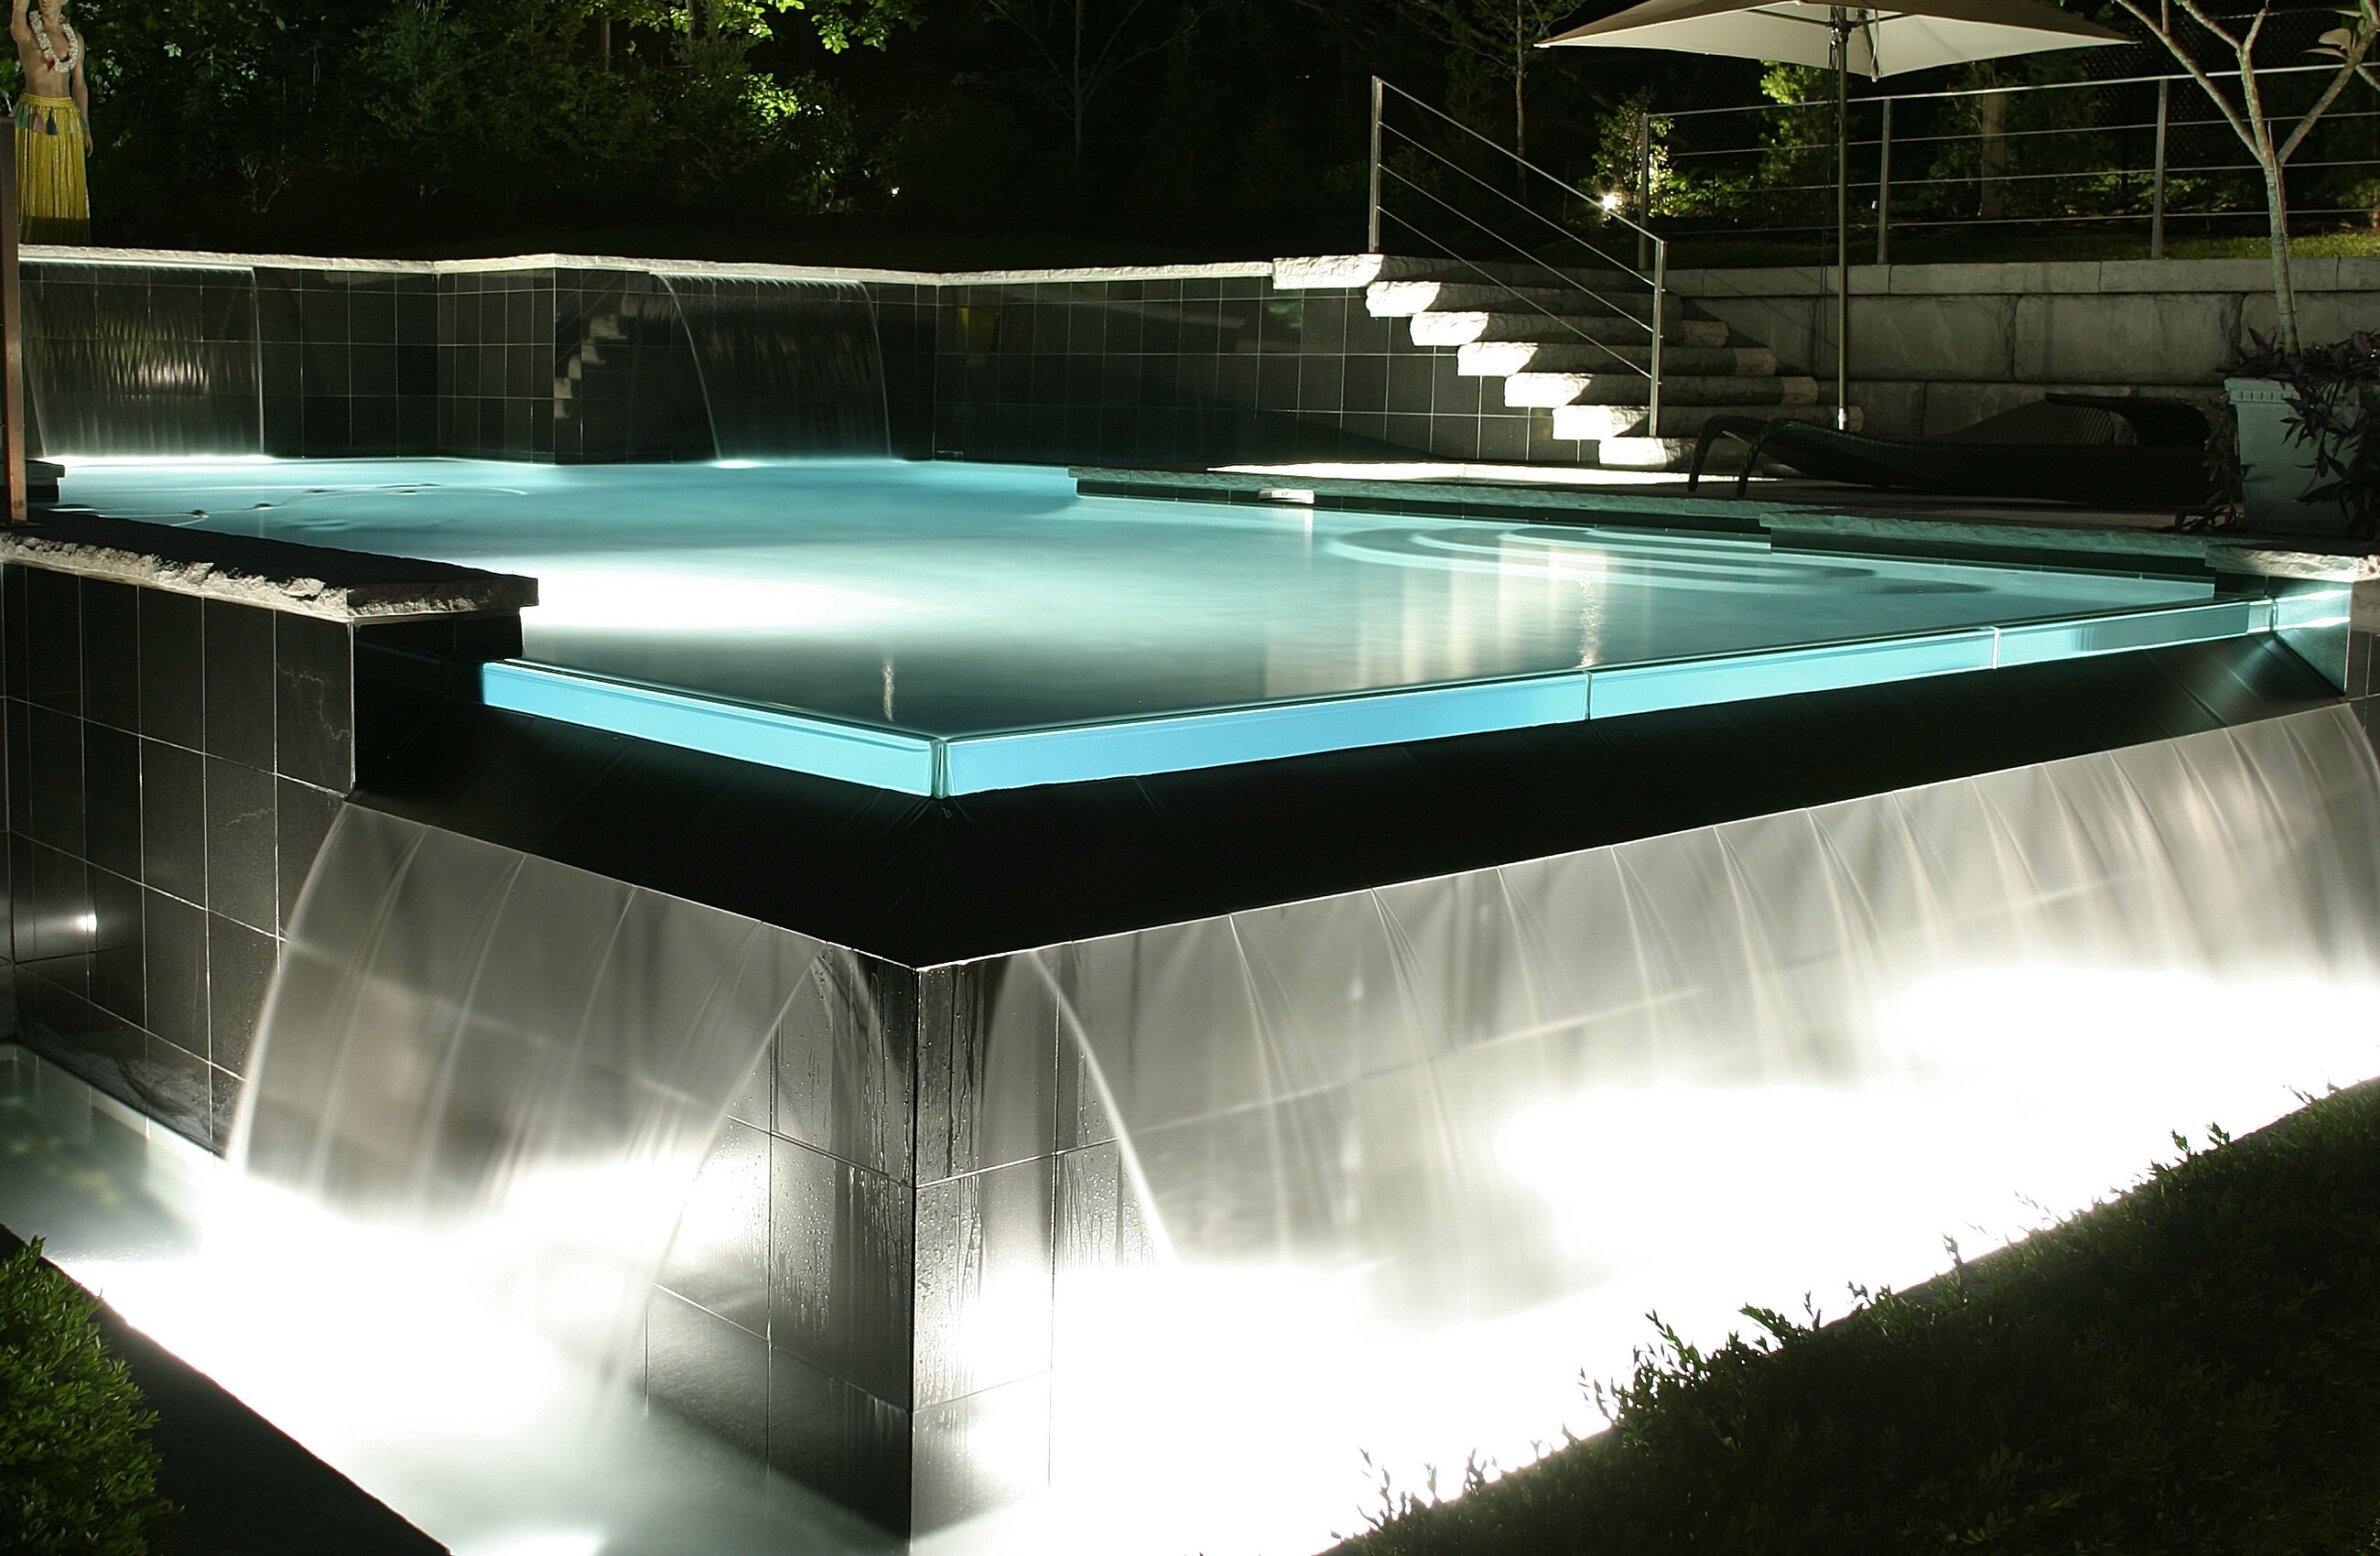 An illuminated outdoor swimming pool at night features cascading water, tiled edges, and steps with a stylish modern design and reflective surfaces.